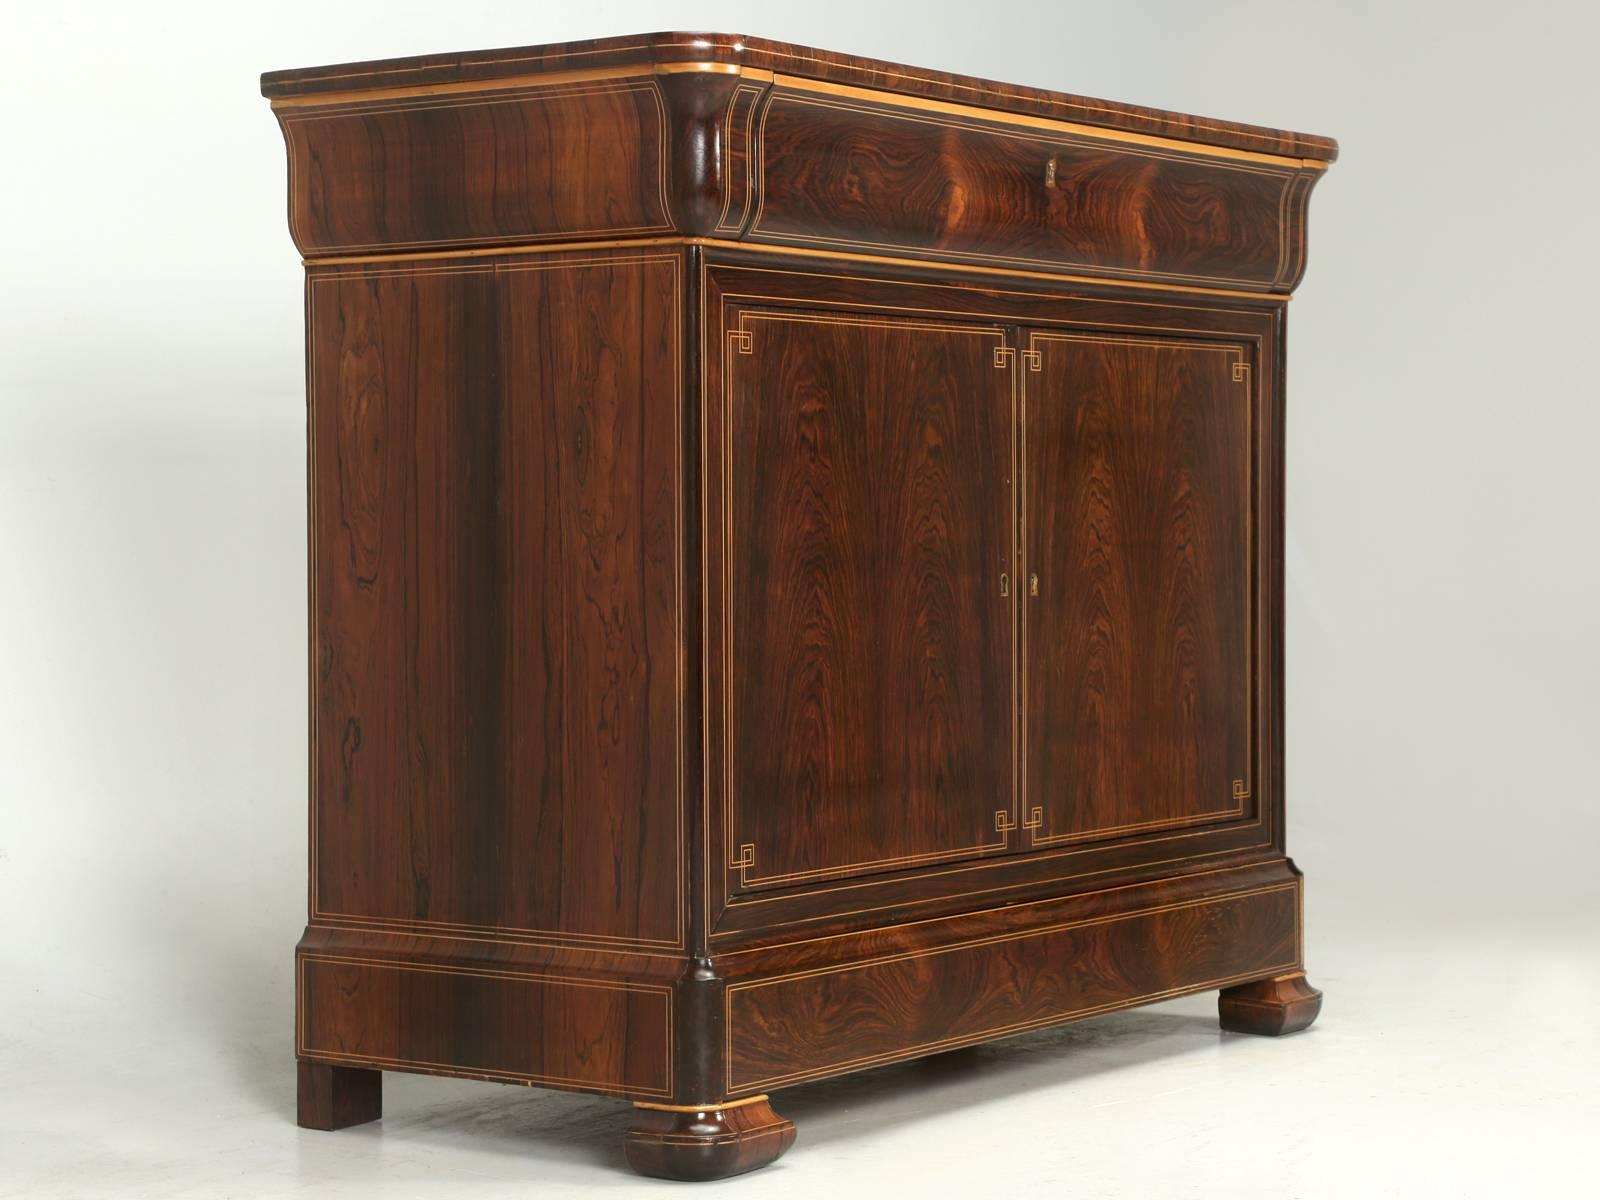 Antique French Commode or Buffet, made from one of the rarest woods, palisander, or more commonly referred to as, Madagascar Rosewood. Not only is this one of the world’s most beautiful species of woods, but the quality of construction, is